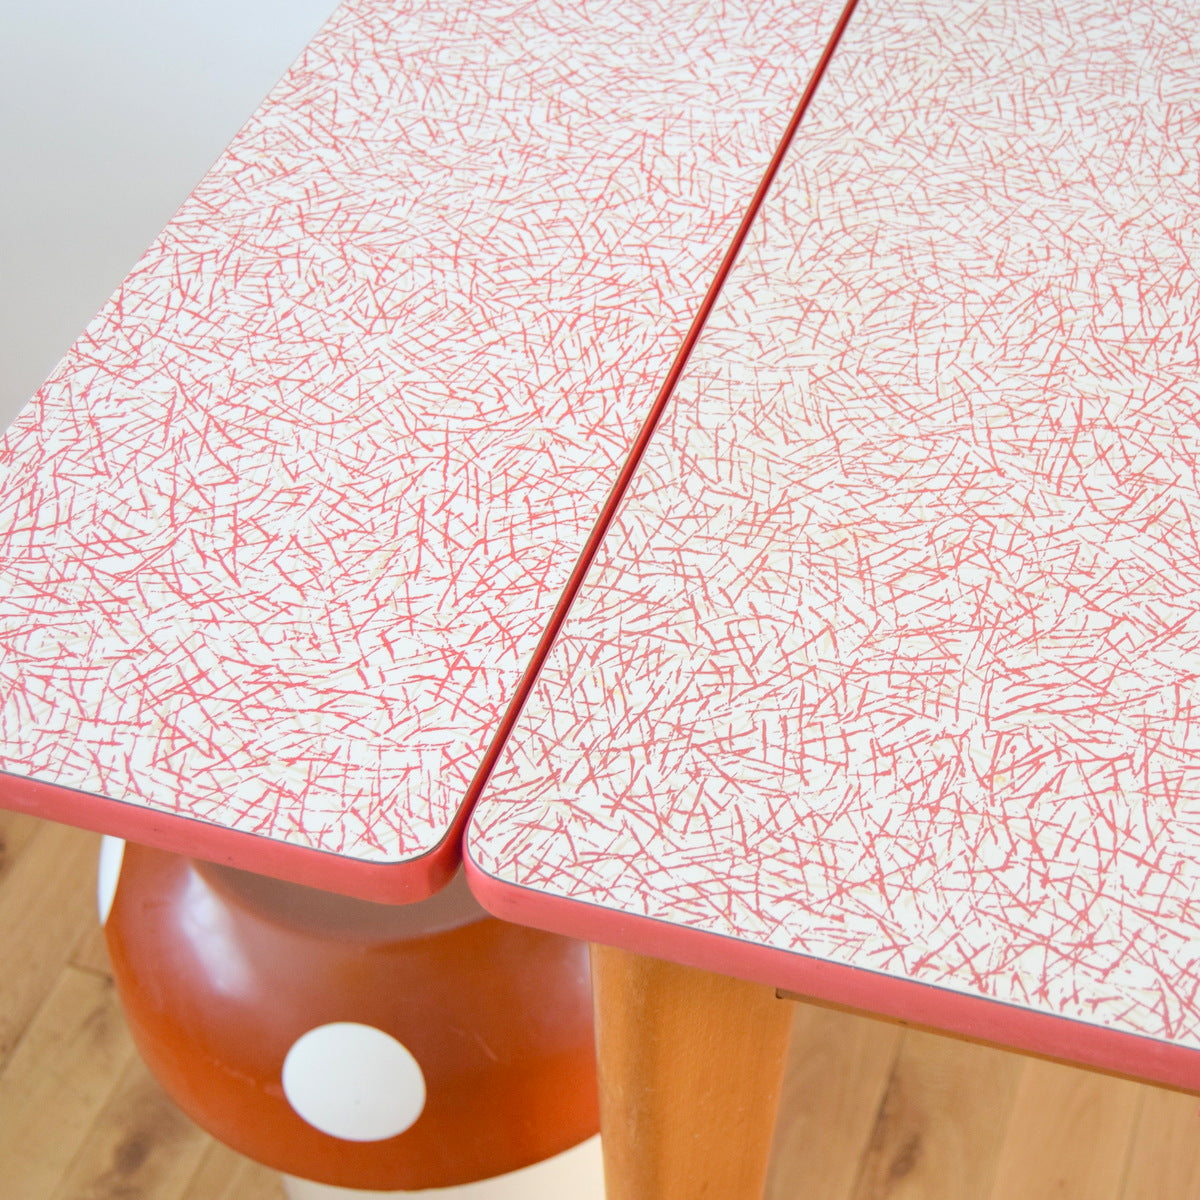 Vintage 1950s Extending Formica Table - Printed Formica - Red & Grey